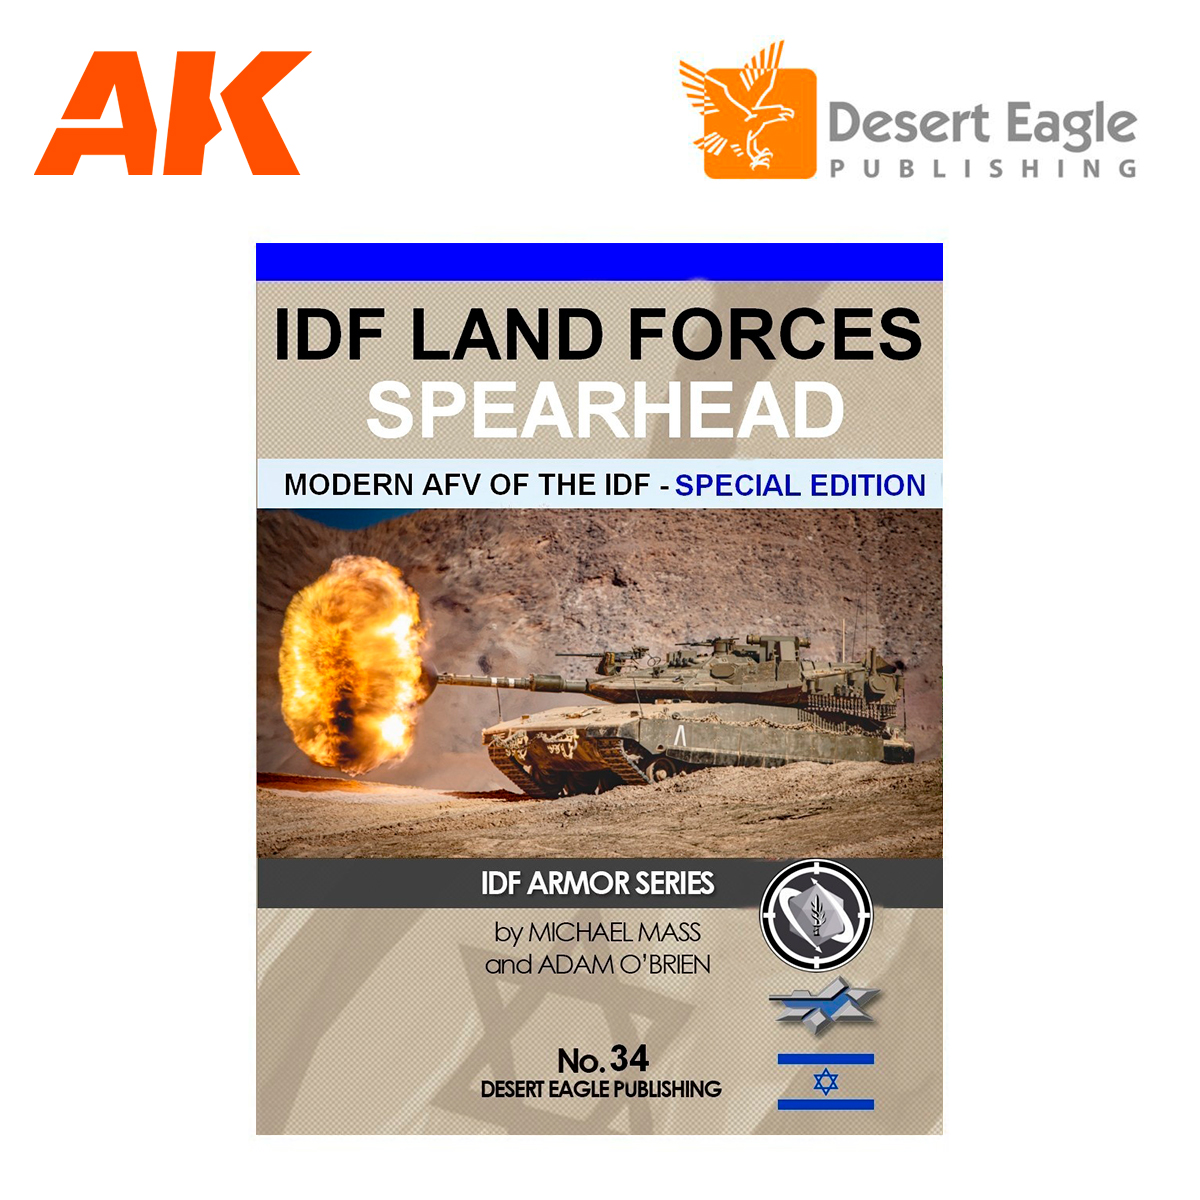 IDF Land Forces Spearhead